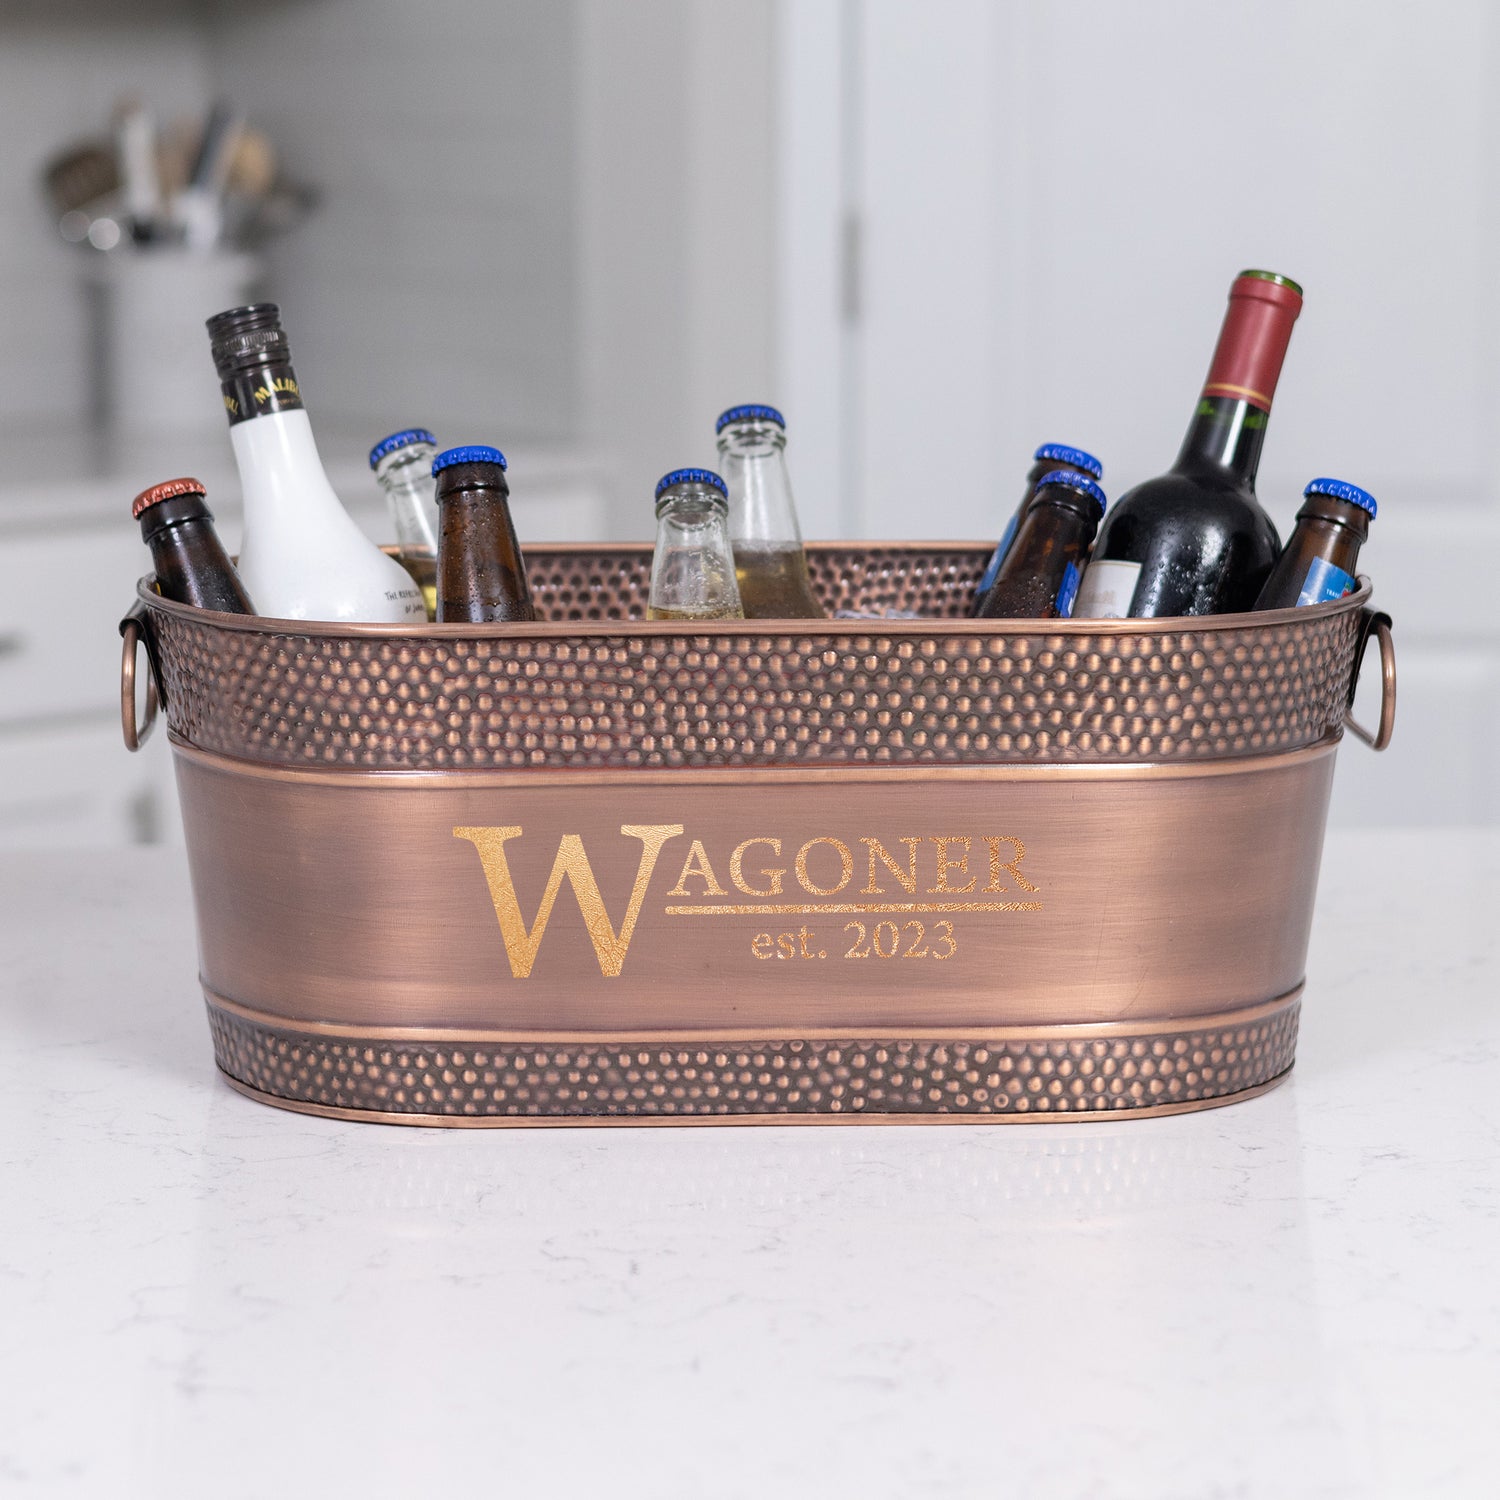 Personalized copper drink bucket to chill wine and beer for parties.  Great wedding, anniversary, or housewarming gift with the added custom name, monogram, or message.